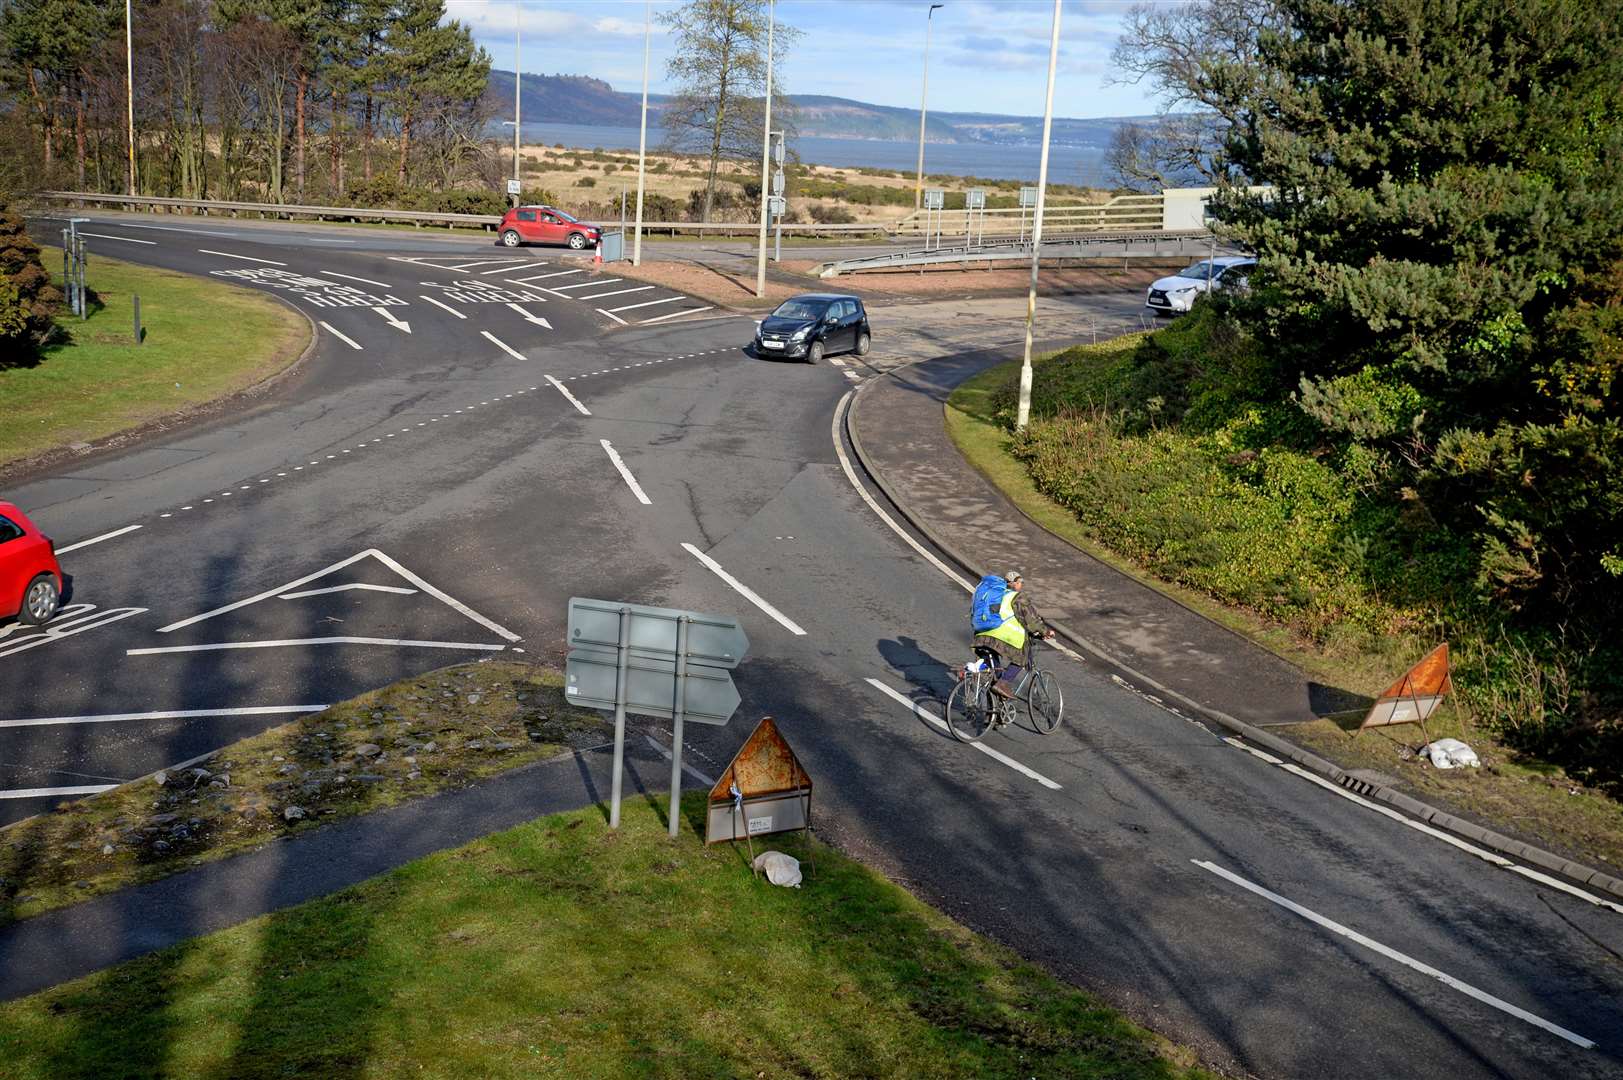 The location where a new signal-controlled crossing may be installed.